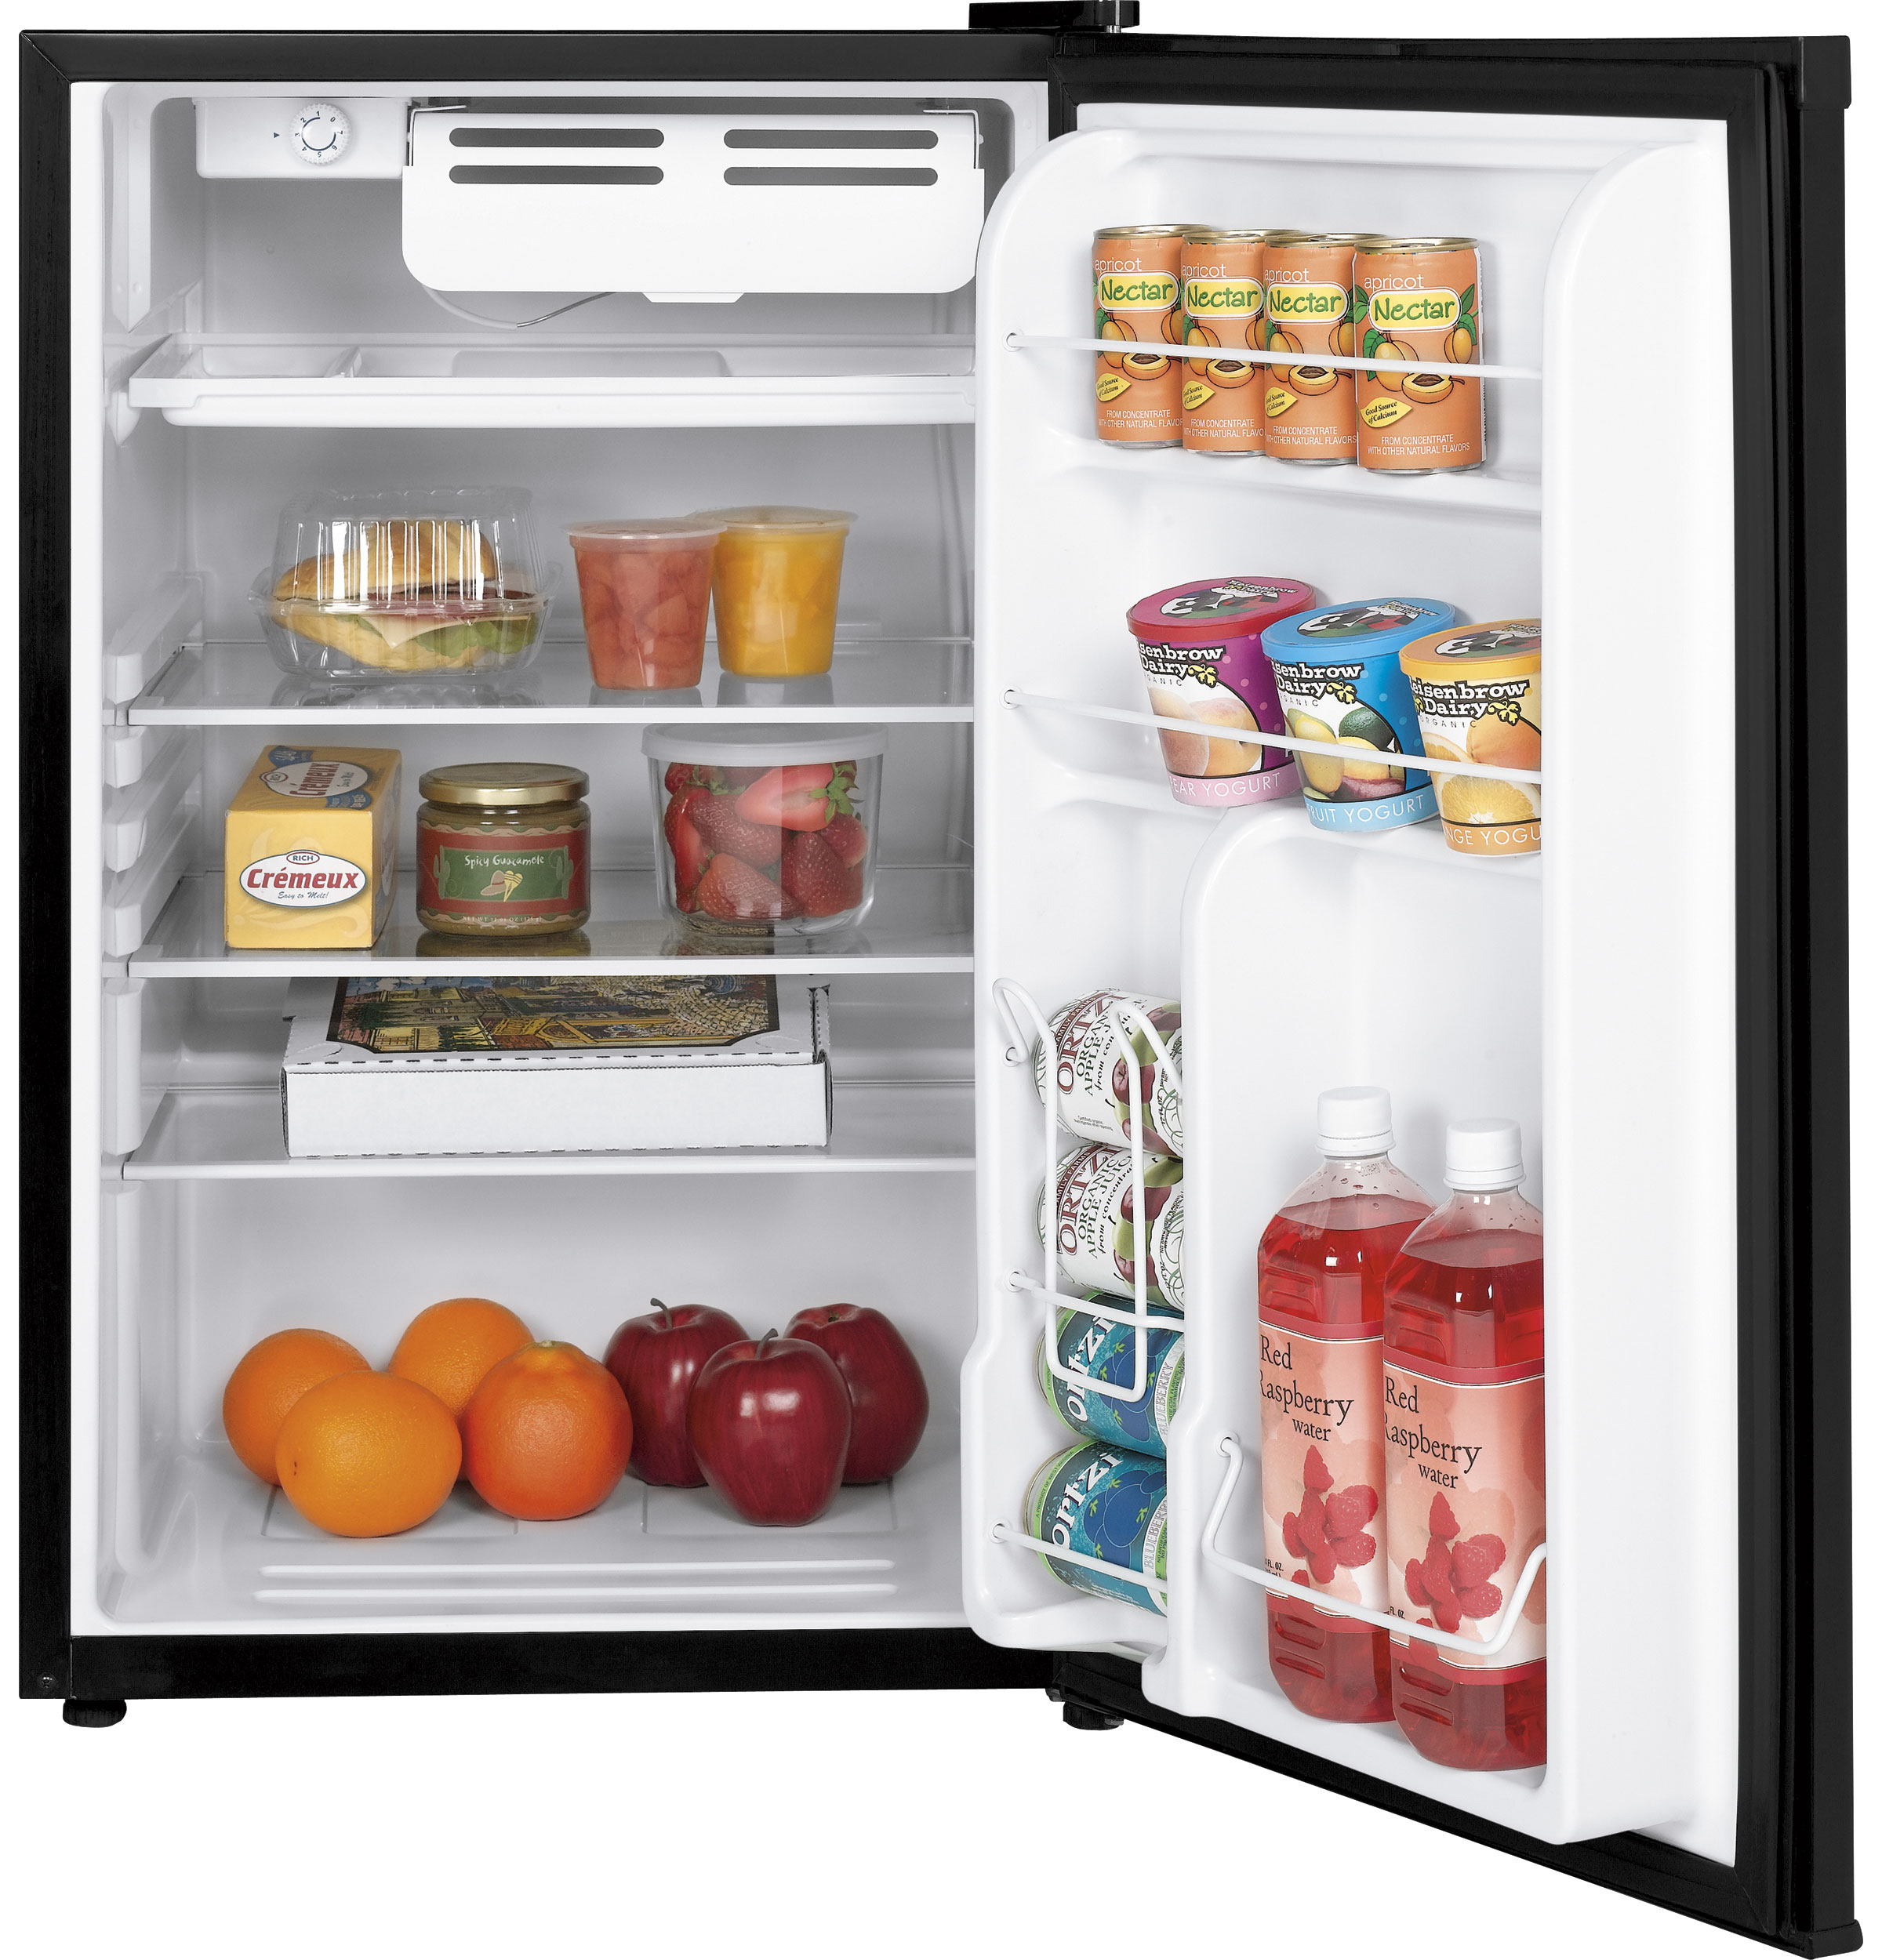 Hotpoint® ENERGY STAR® 4.5 Cu. Ft. Compact Refrigerator